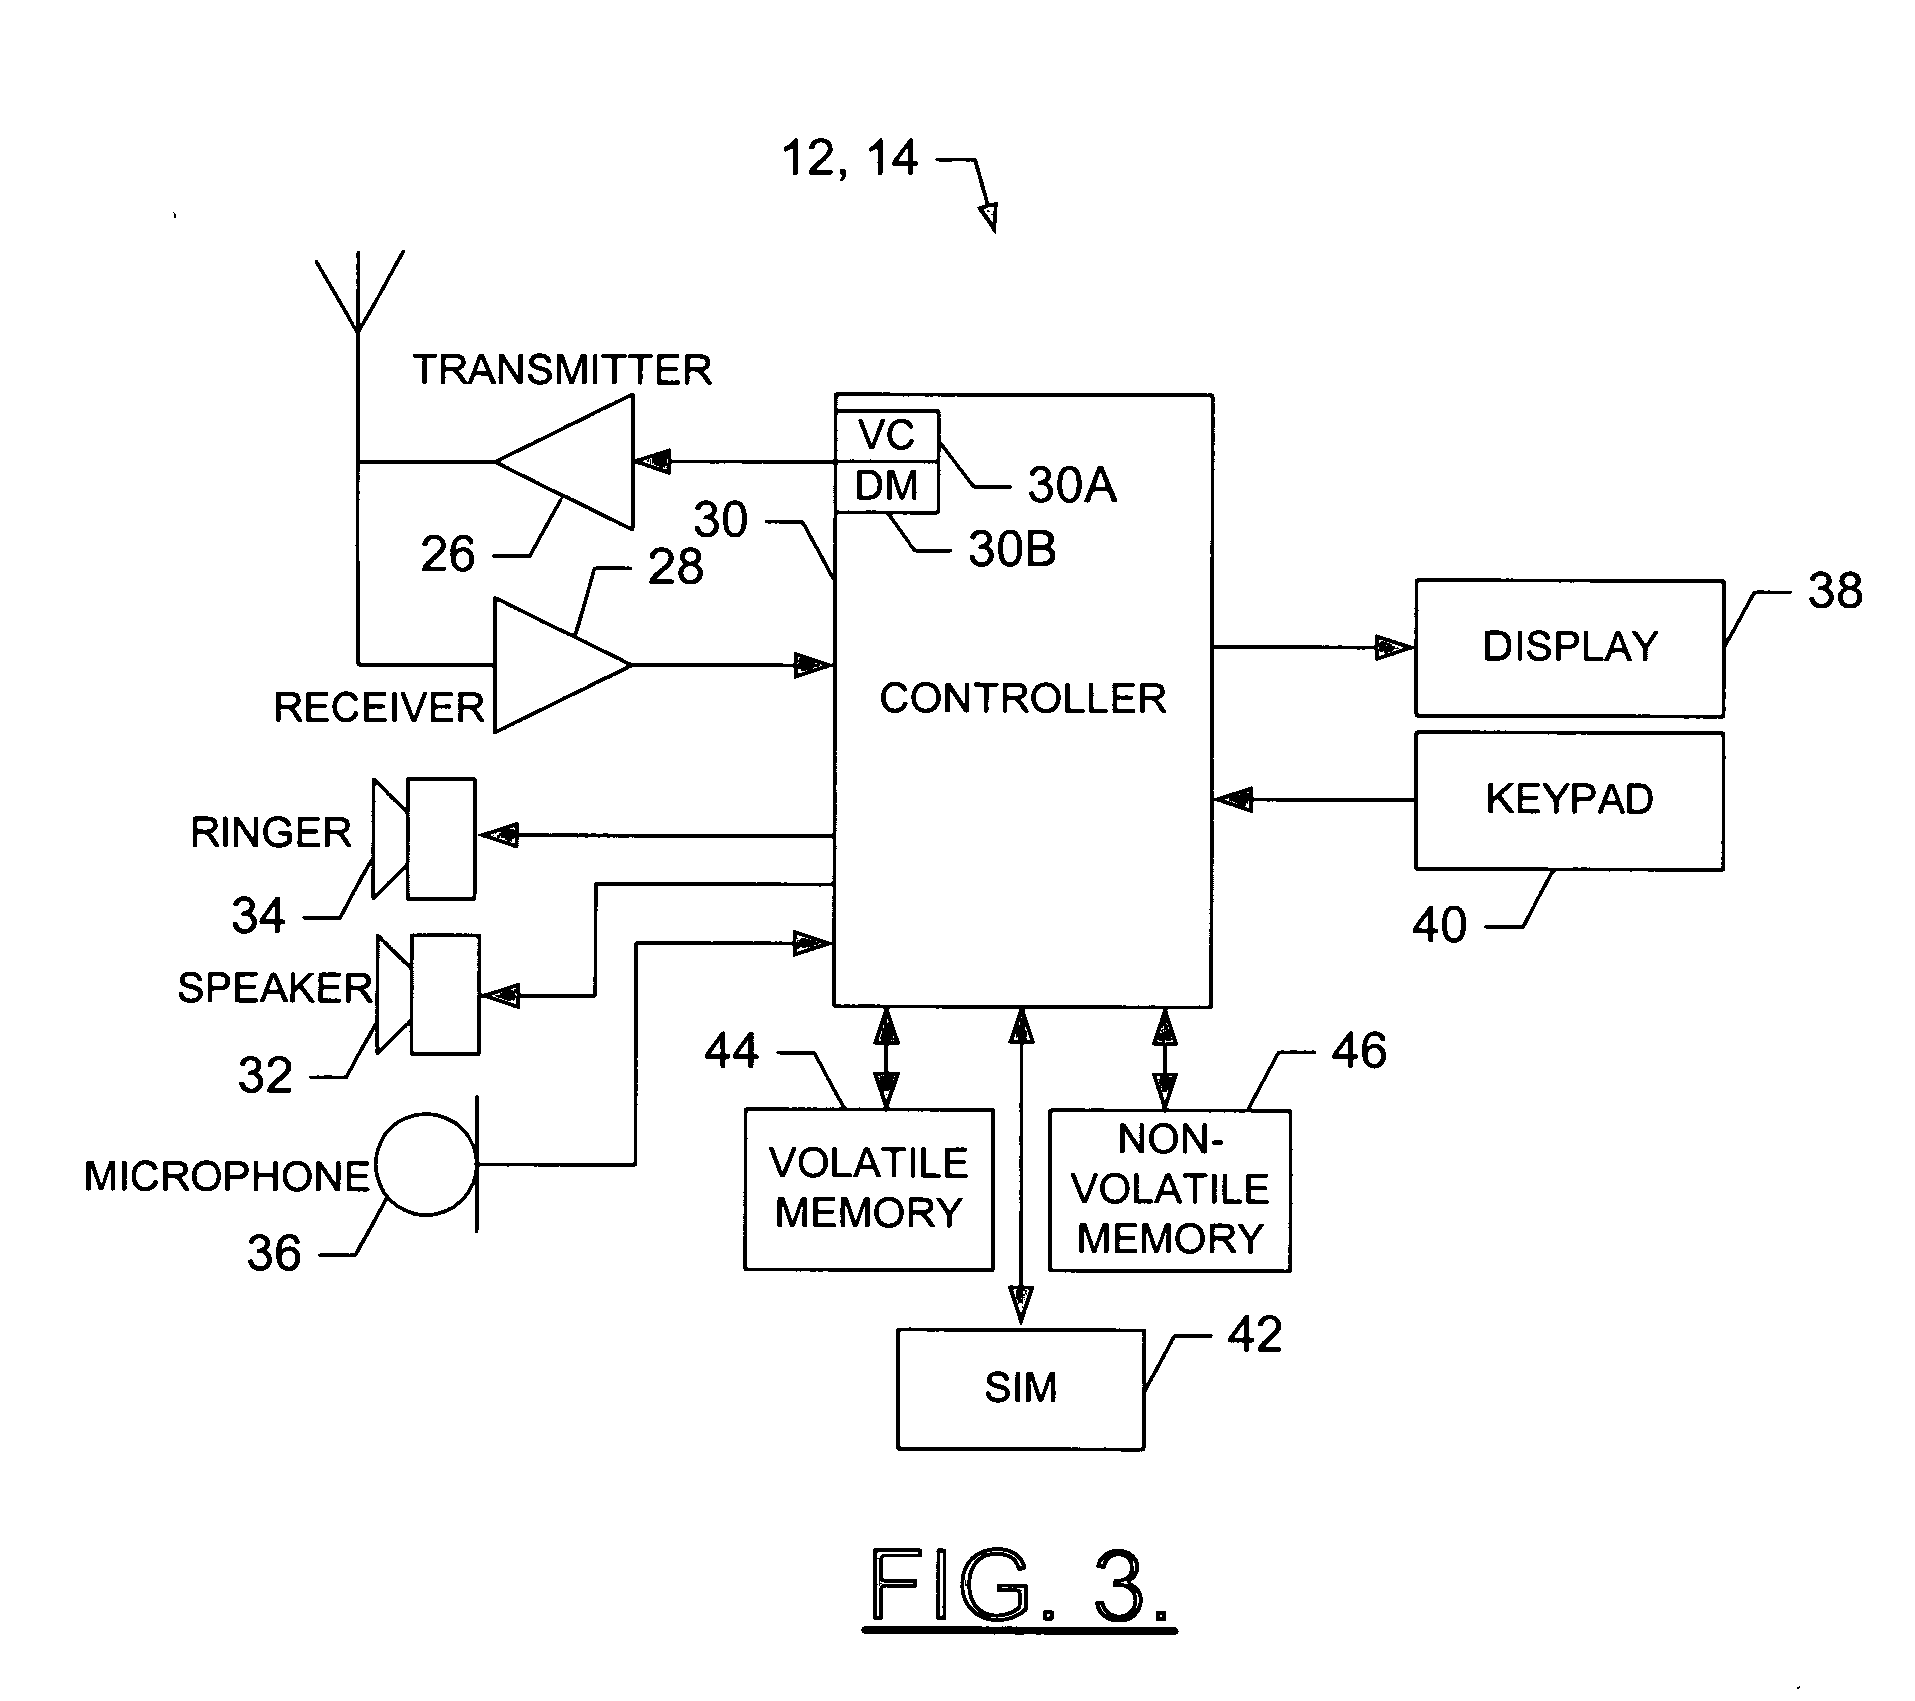 System, method and computer program product for increasing throughput in bi-directional communications